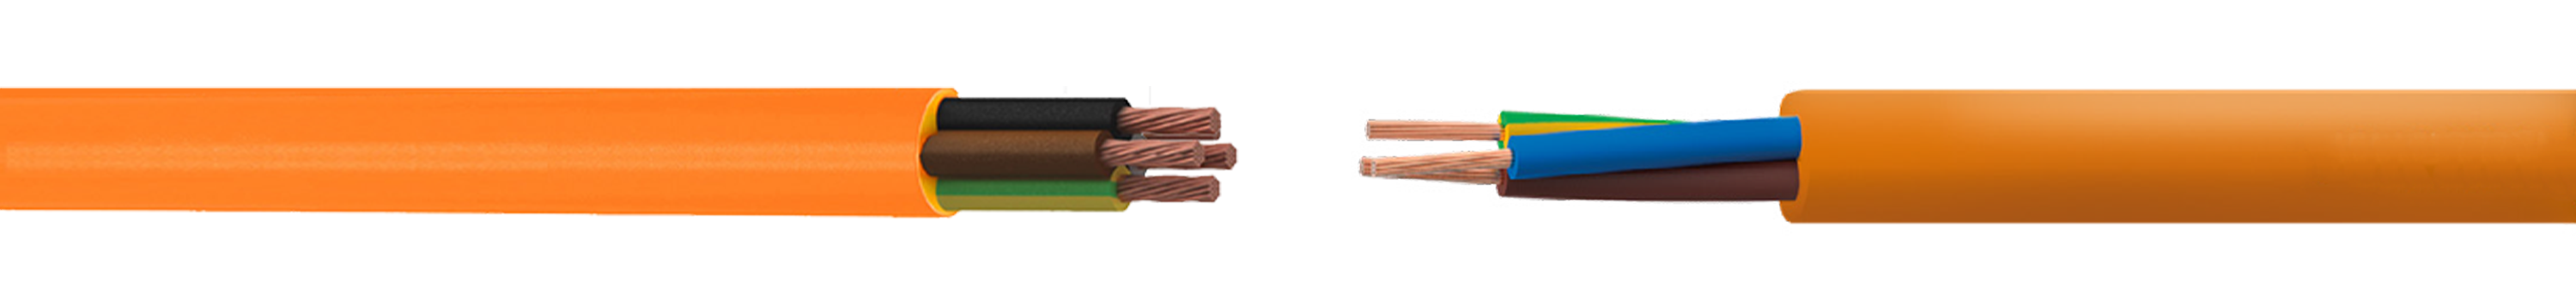 EPR-INSULATED-AND-PUR-SHEATHED-FLEXIBLE-CABLE-H05BQ-F-H07BQ-F